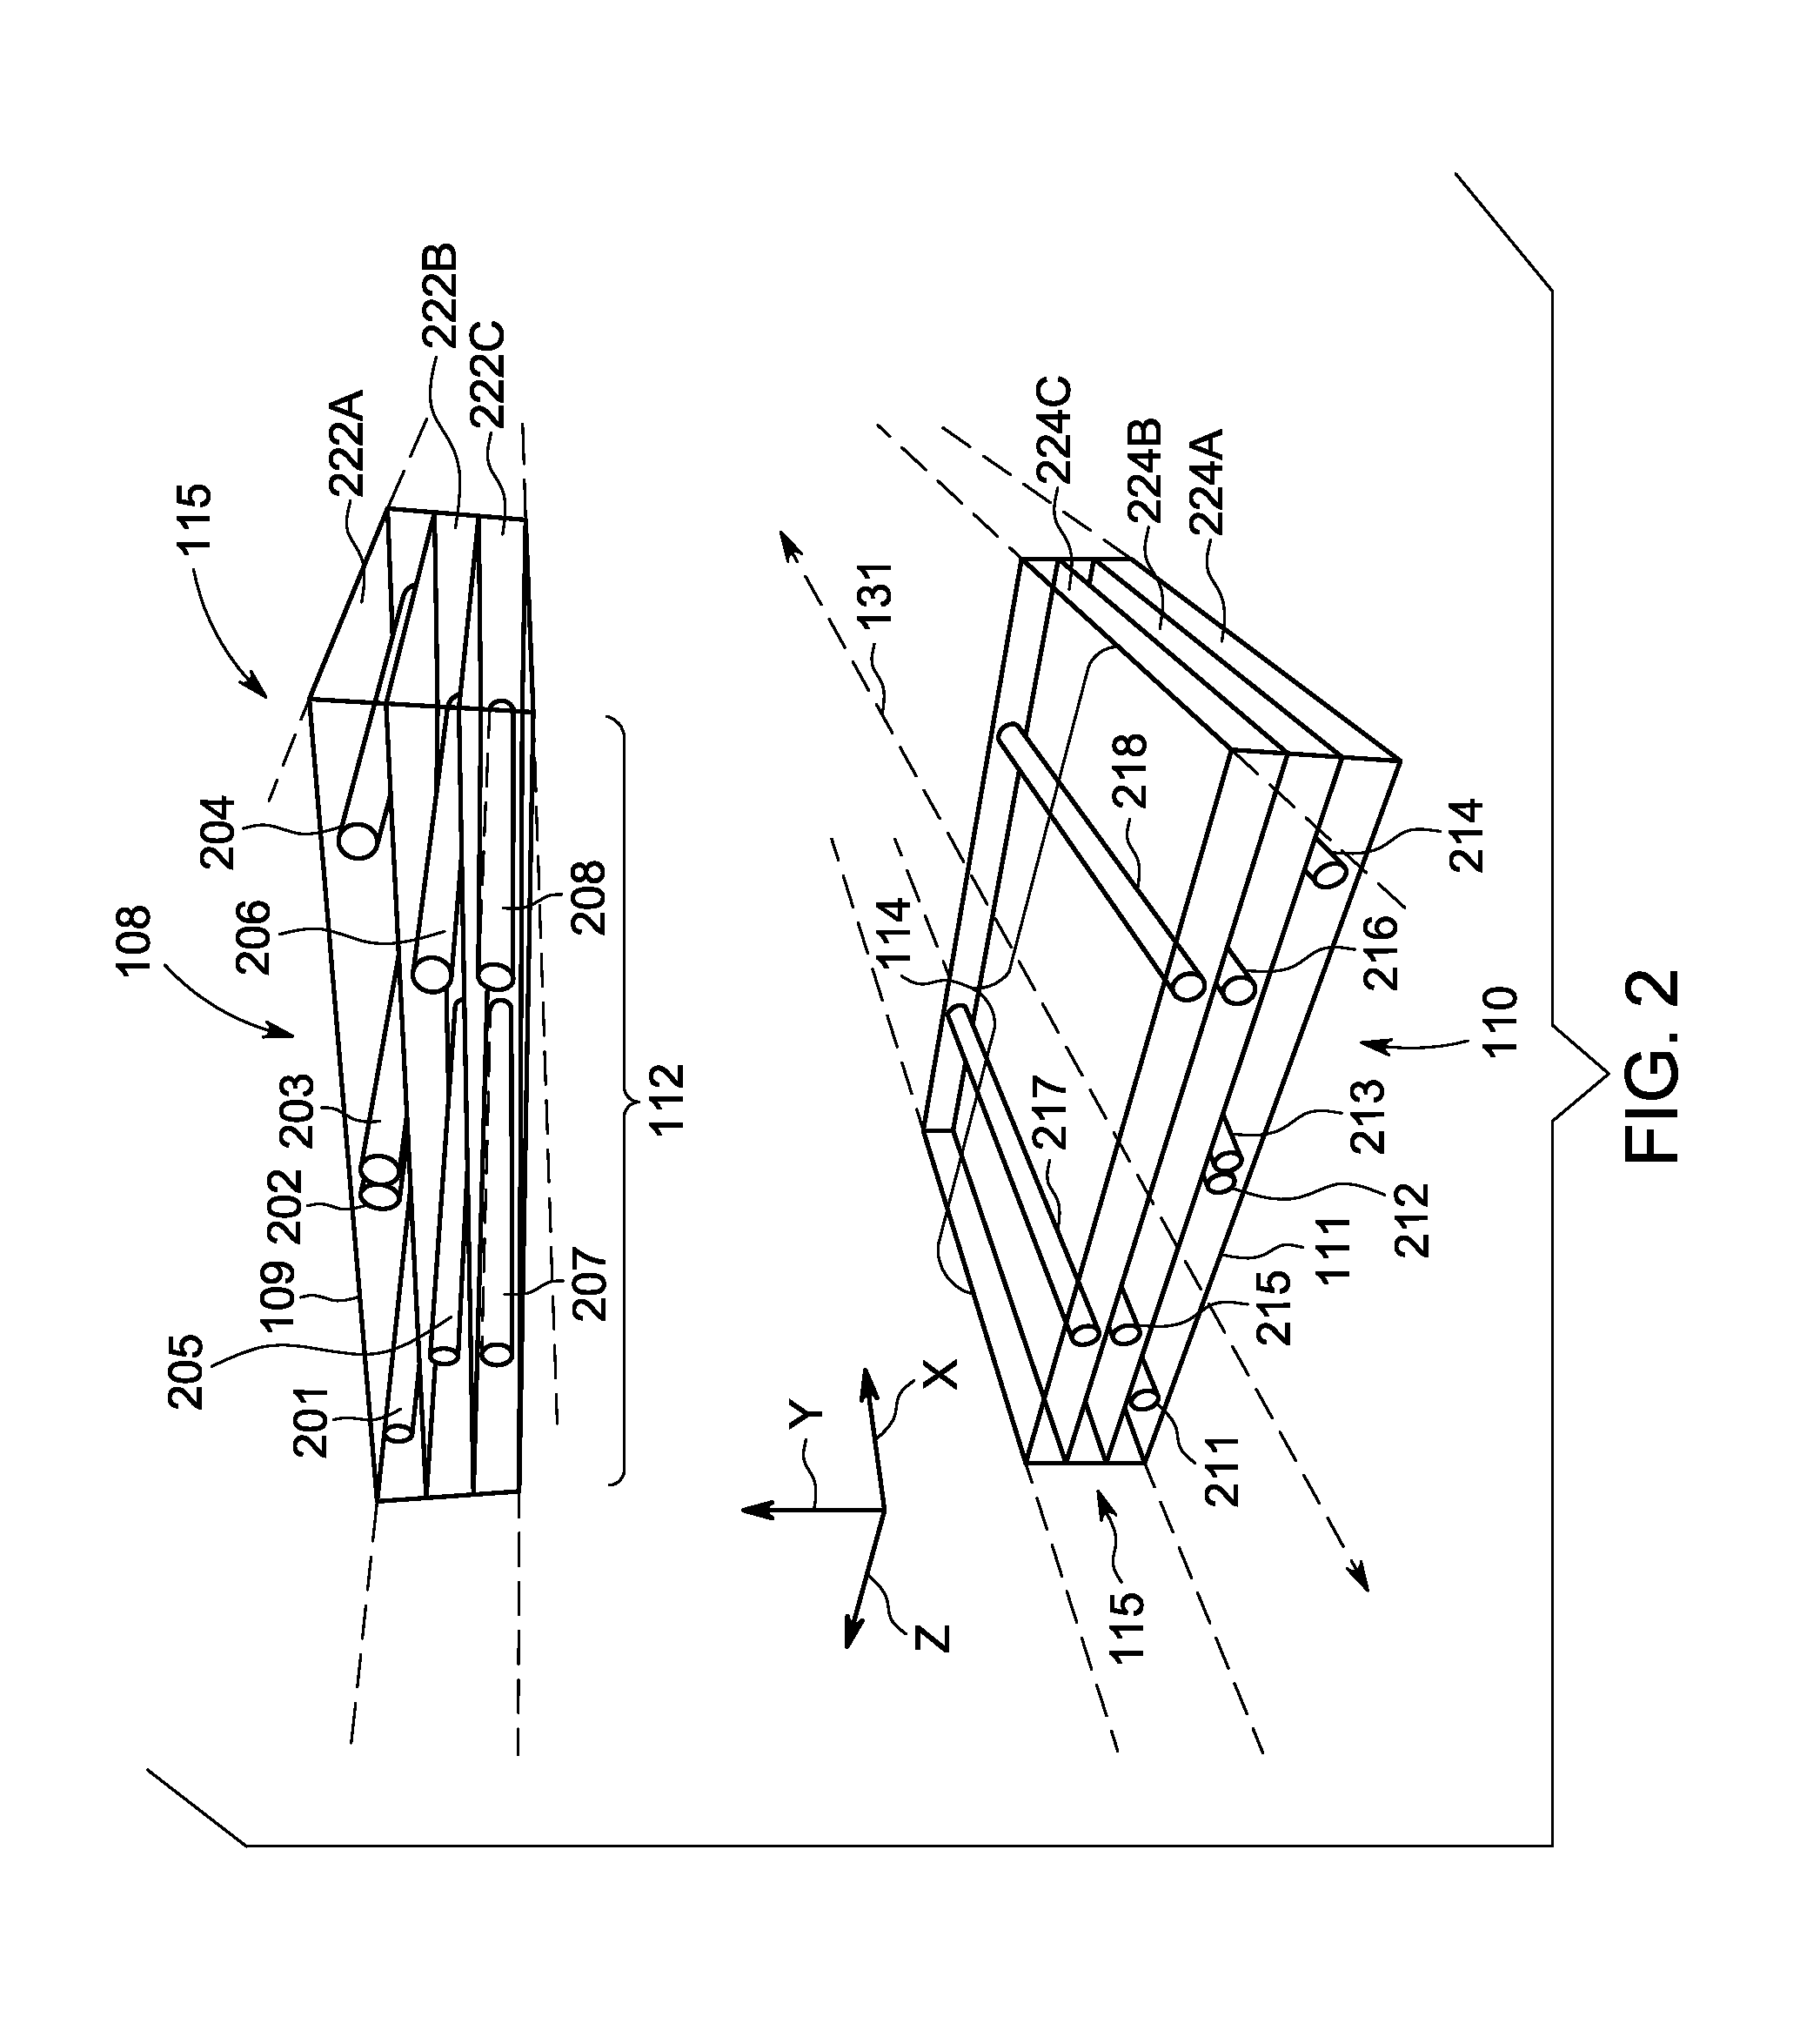 Systems and methods for magnetic material imaging